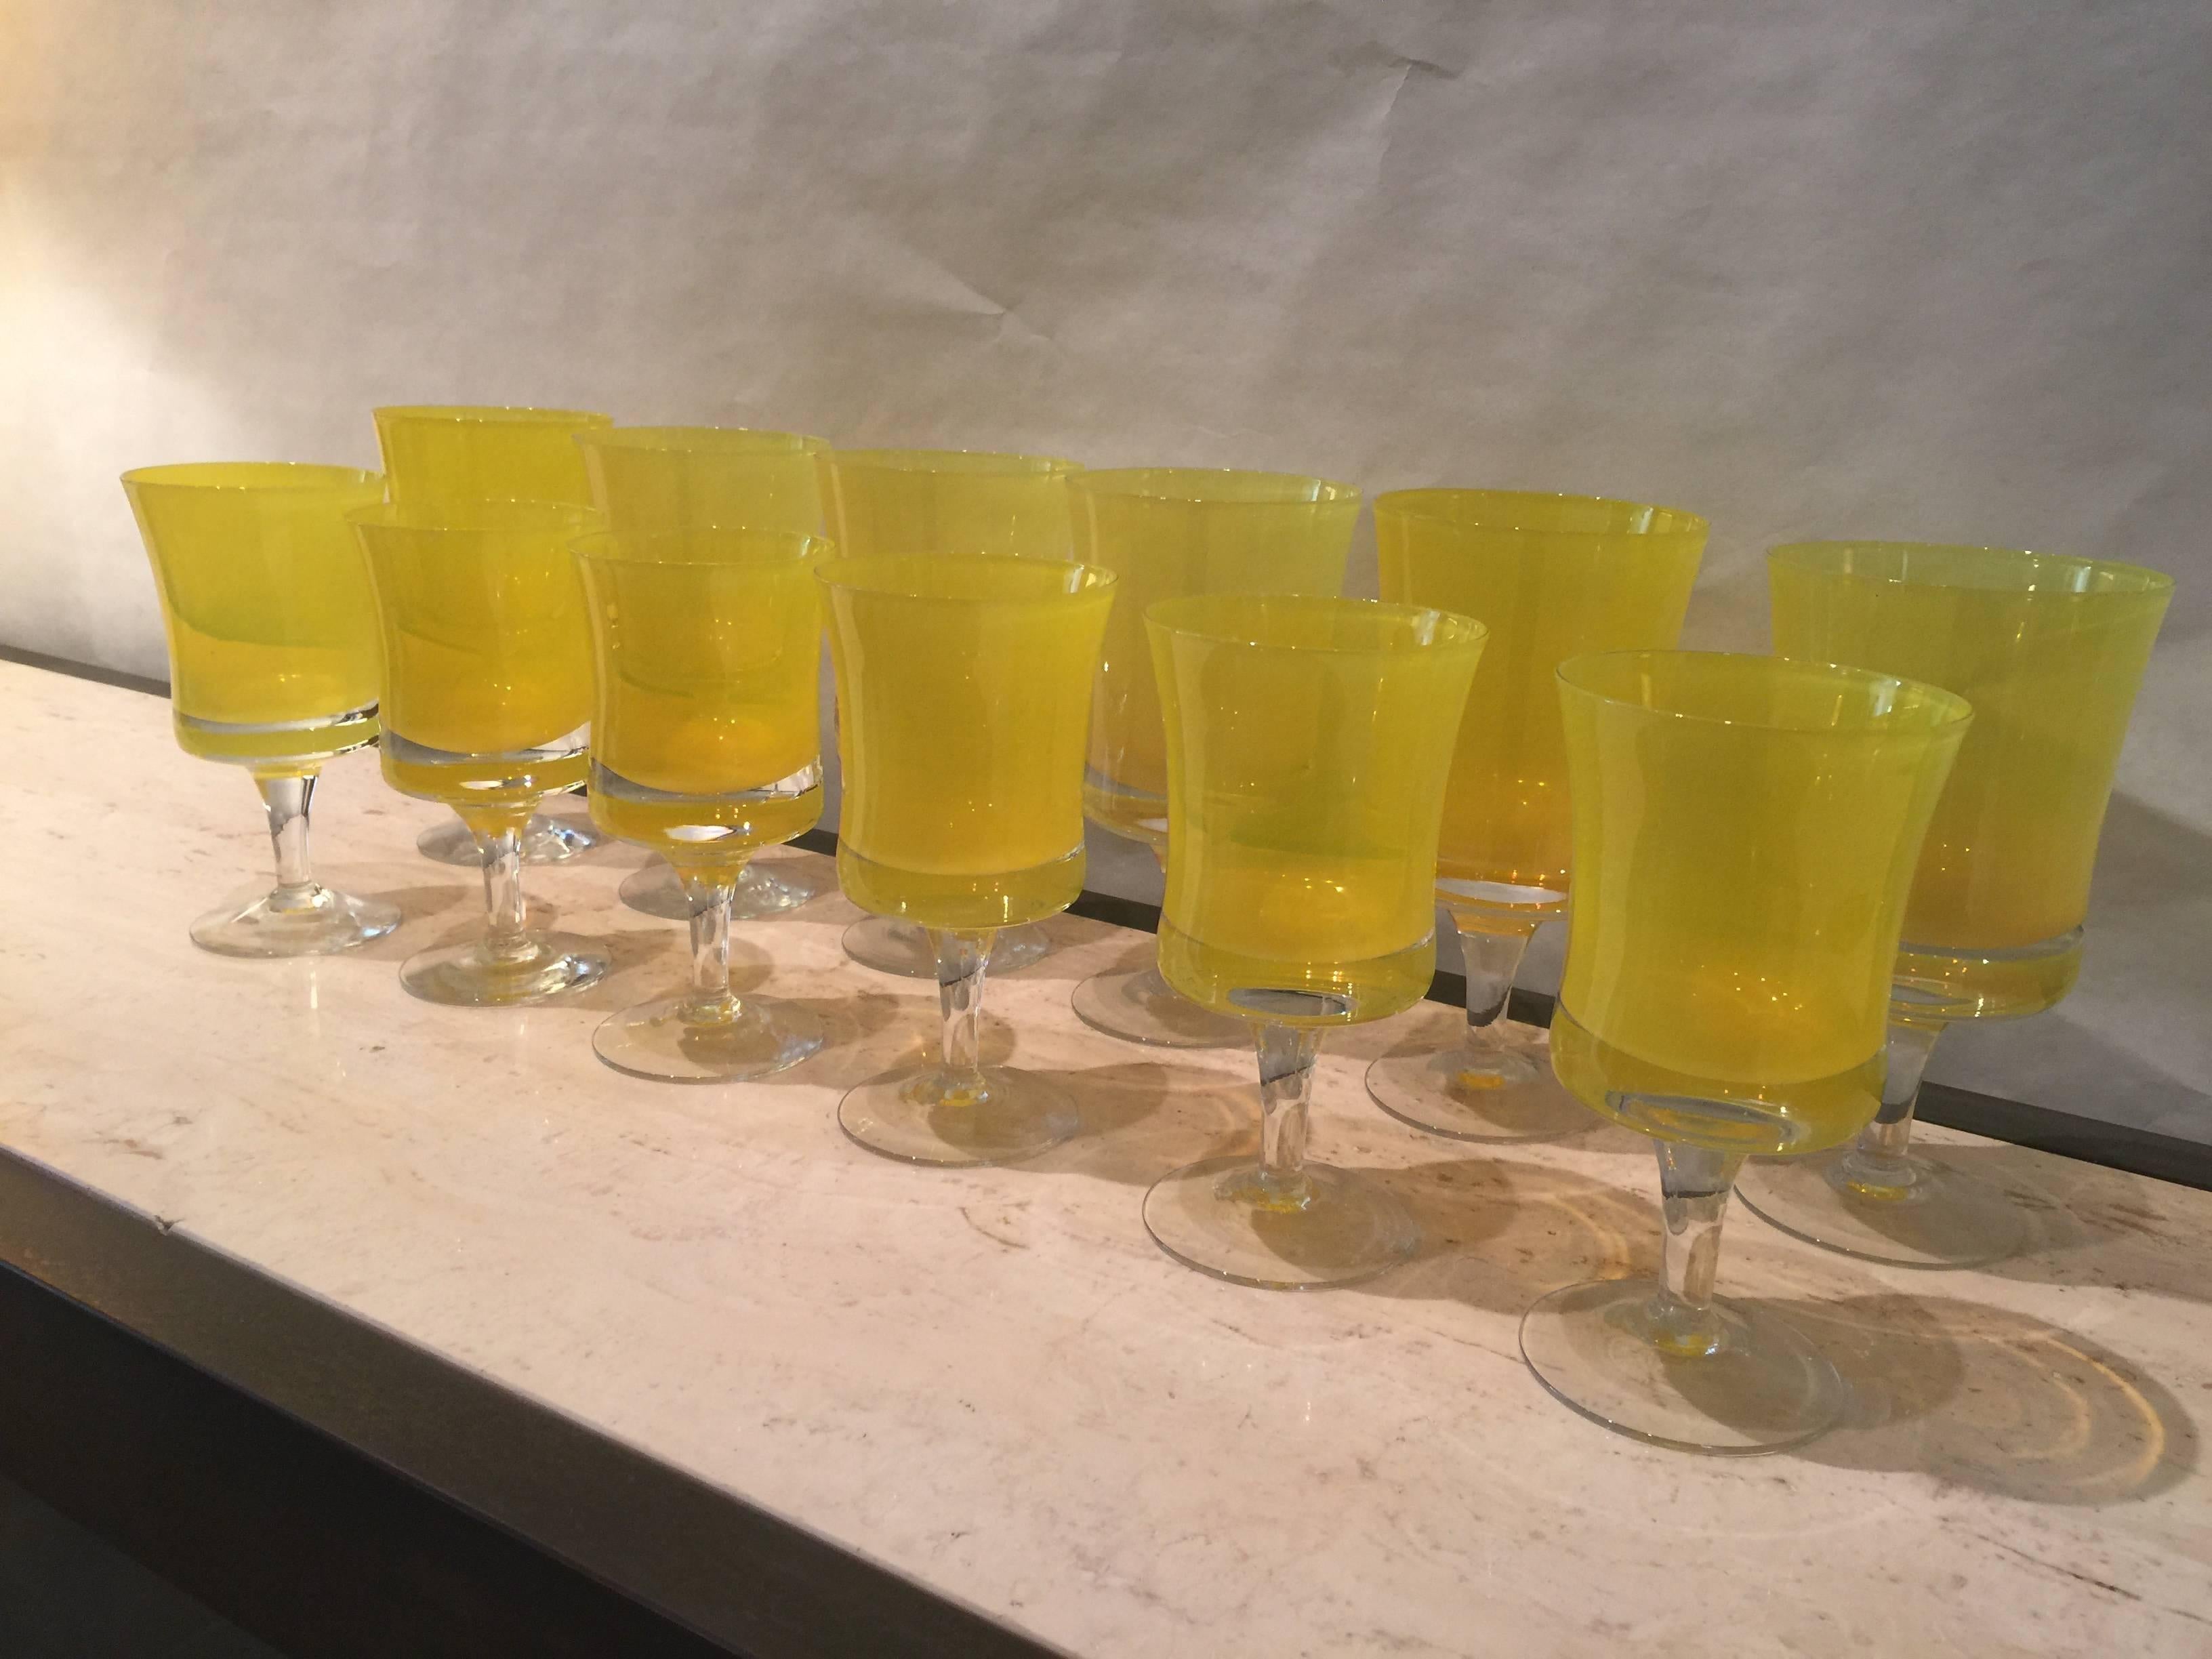 Festive and happy vintage yellow glassware by Seguso, six larger water glasses and six smaller wine glasses. Additional yellow bowl as shown in detail images is available separately.

Dimensions: Large glass 6.5 inches tall, small glass 5.75